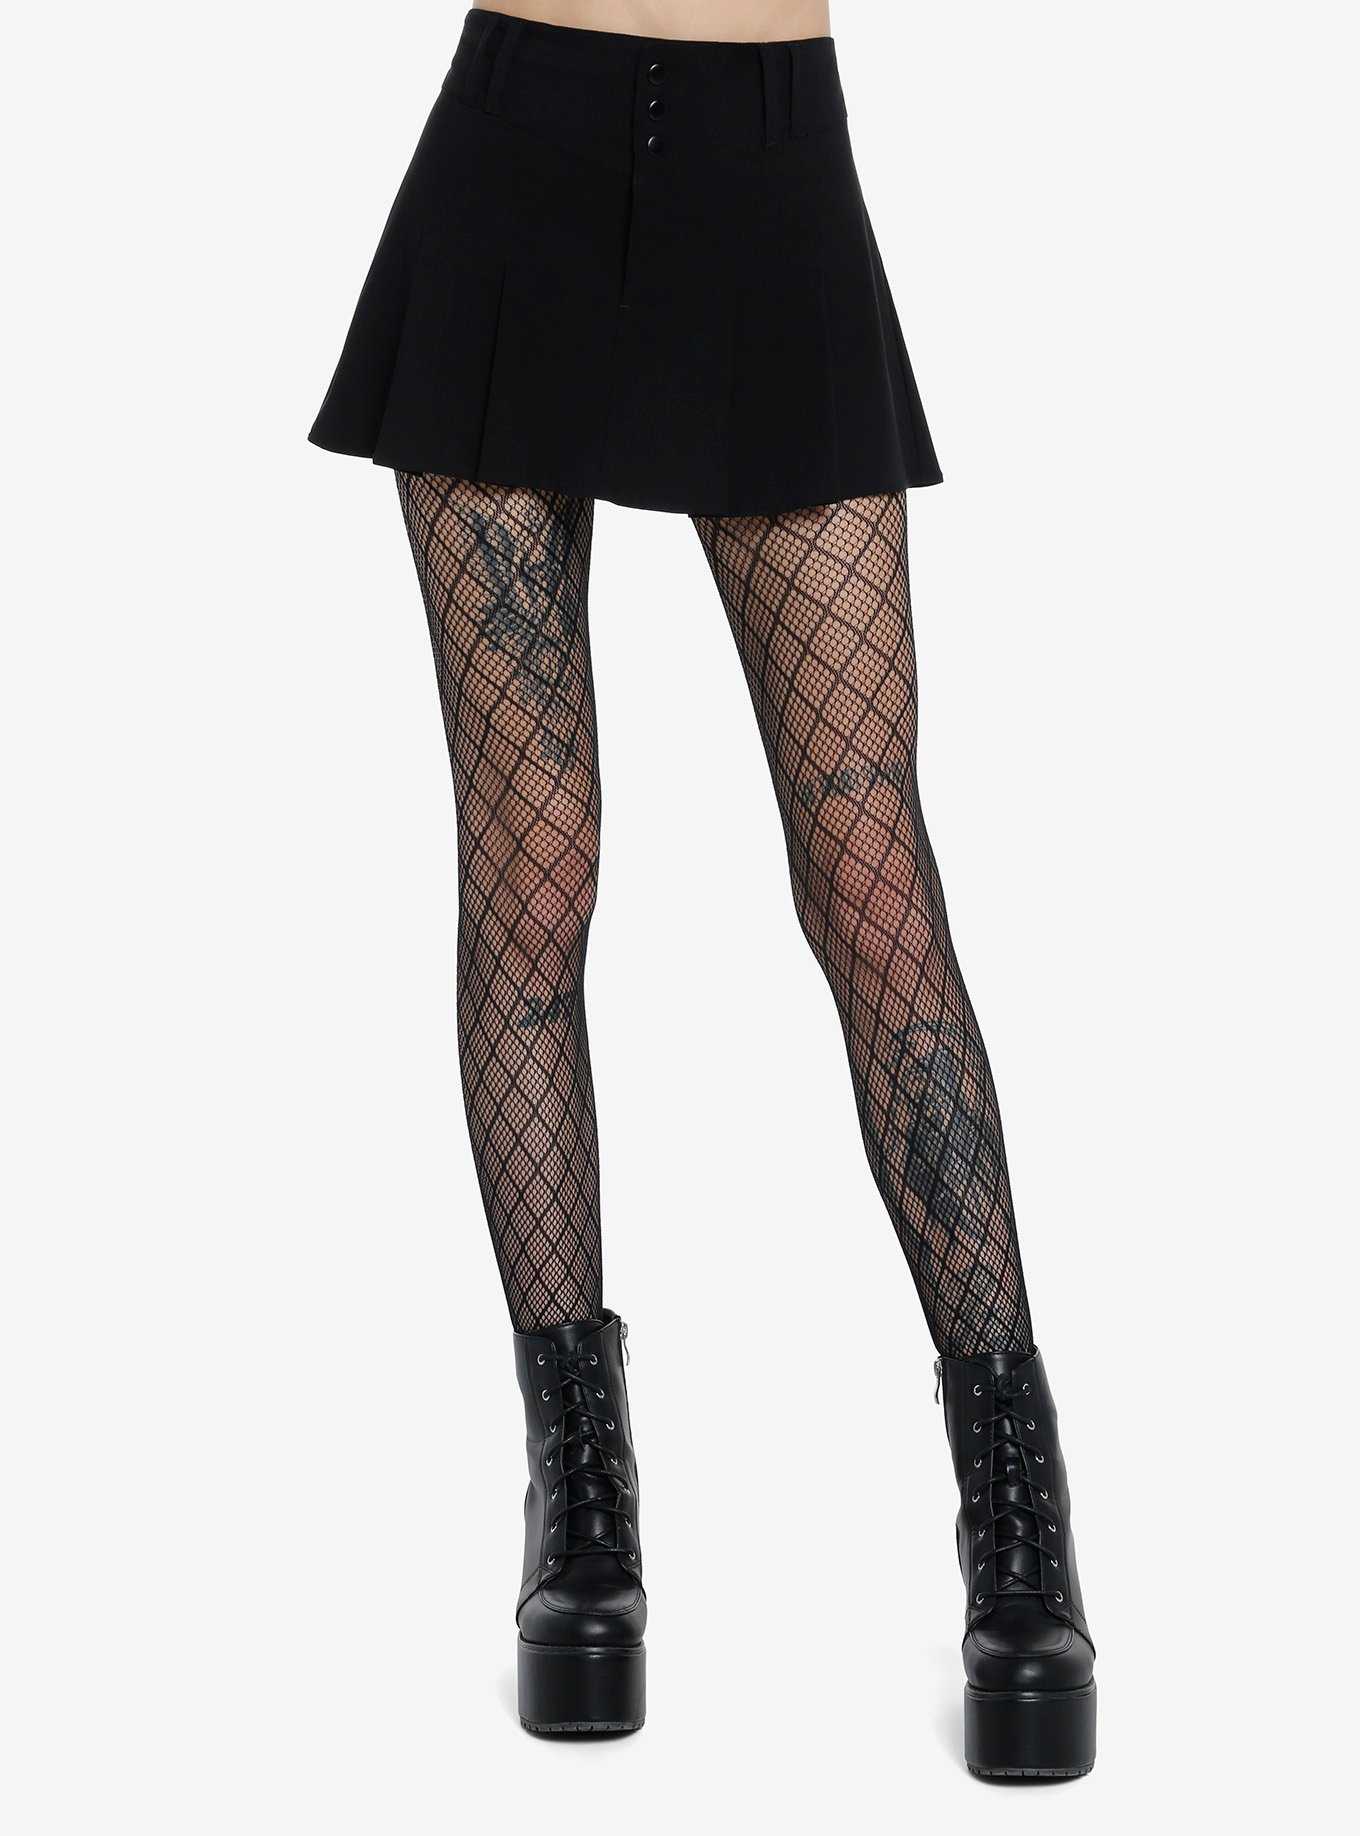 Hot Topic Black Heart White Fishnet Tights One Size Fits Most #45974